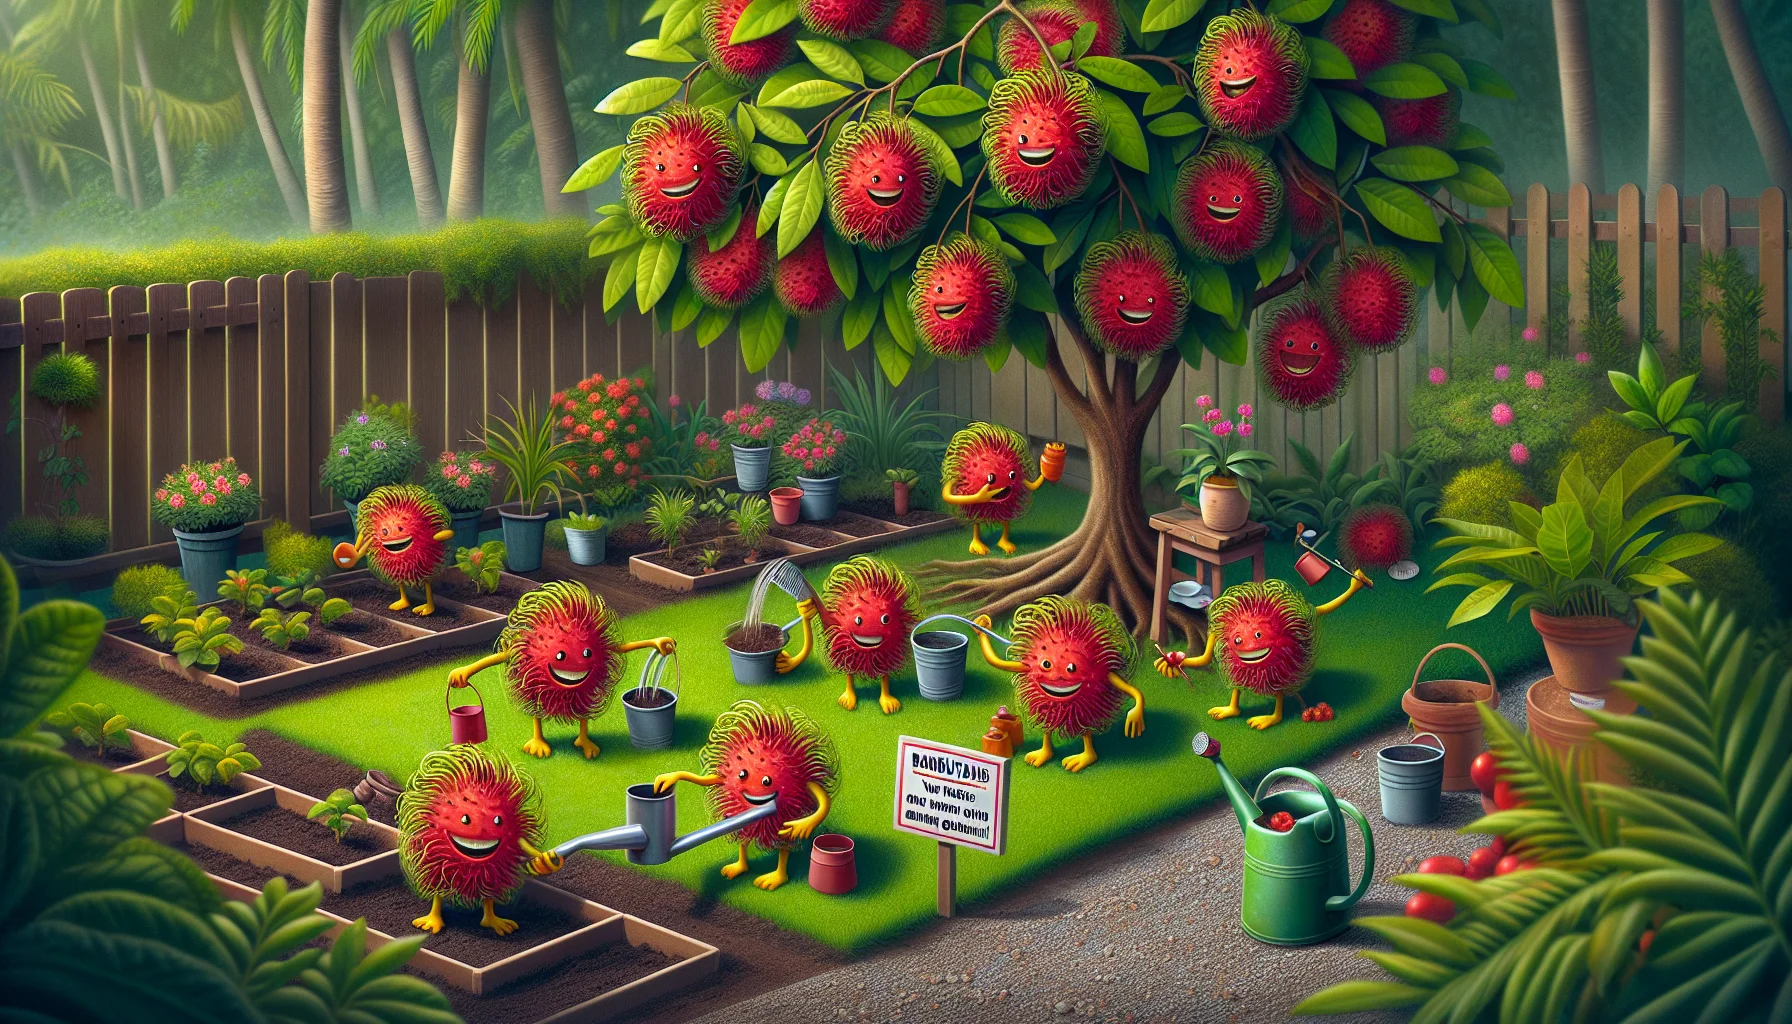 An amusing and realistic illustration showcasing the benefits of the rambutan fruit in a gardening context. The scene depicts a well-retained garden with a variety of plants including a rambutan tree laden with ripe, vibrant red fruits. Several fruits have fallen on the ground and have comically sprouted hands and feet, happily engaging in gardening activities like watering plants and planting seeds, demonstrating their nutritional value. A signpost nearby humorously states 'Rambutans - Your helpers in growing vibrant gardens!'. The image is designed to encourage people to take pleasure in gardening while also promoting the benefits of the rambutan fruit.